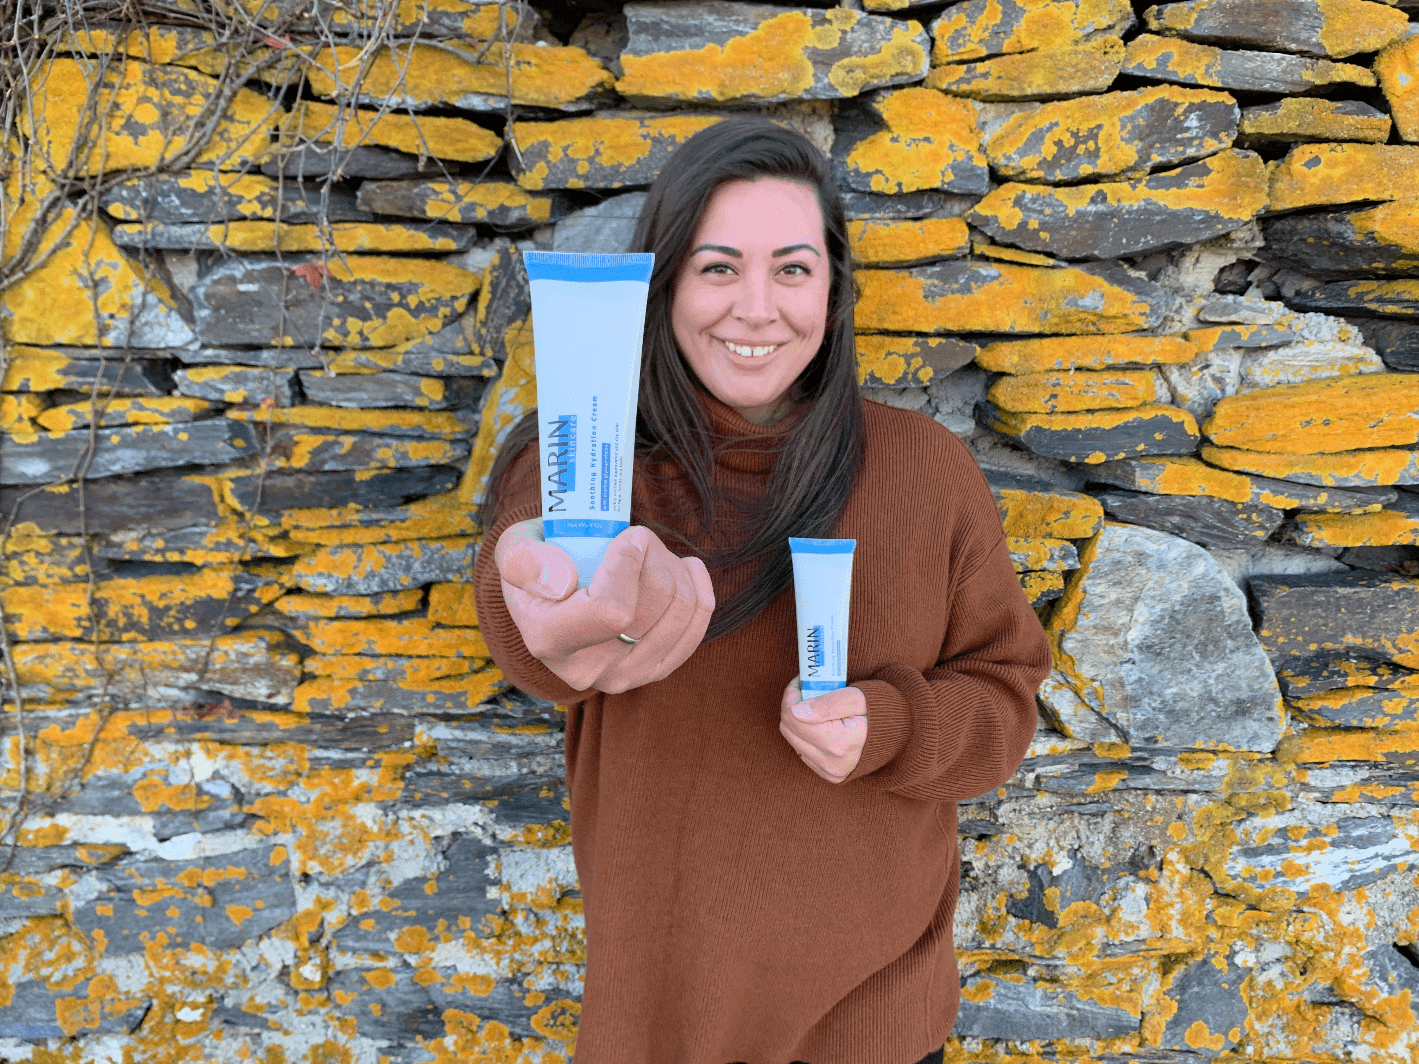 Maine skincare startup using lobster glycoprotein launches first product for eczema, dermatitis, dry skin - Marin Skincare